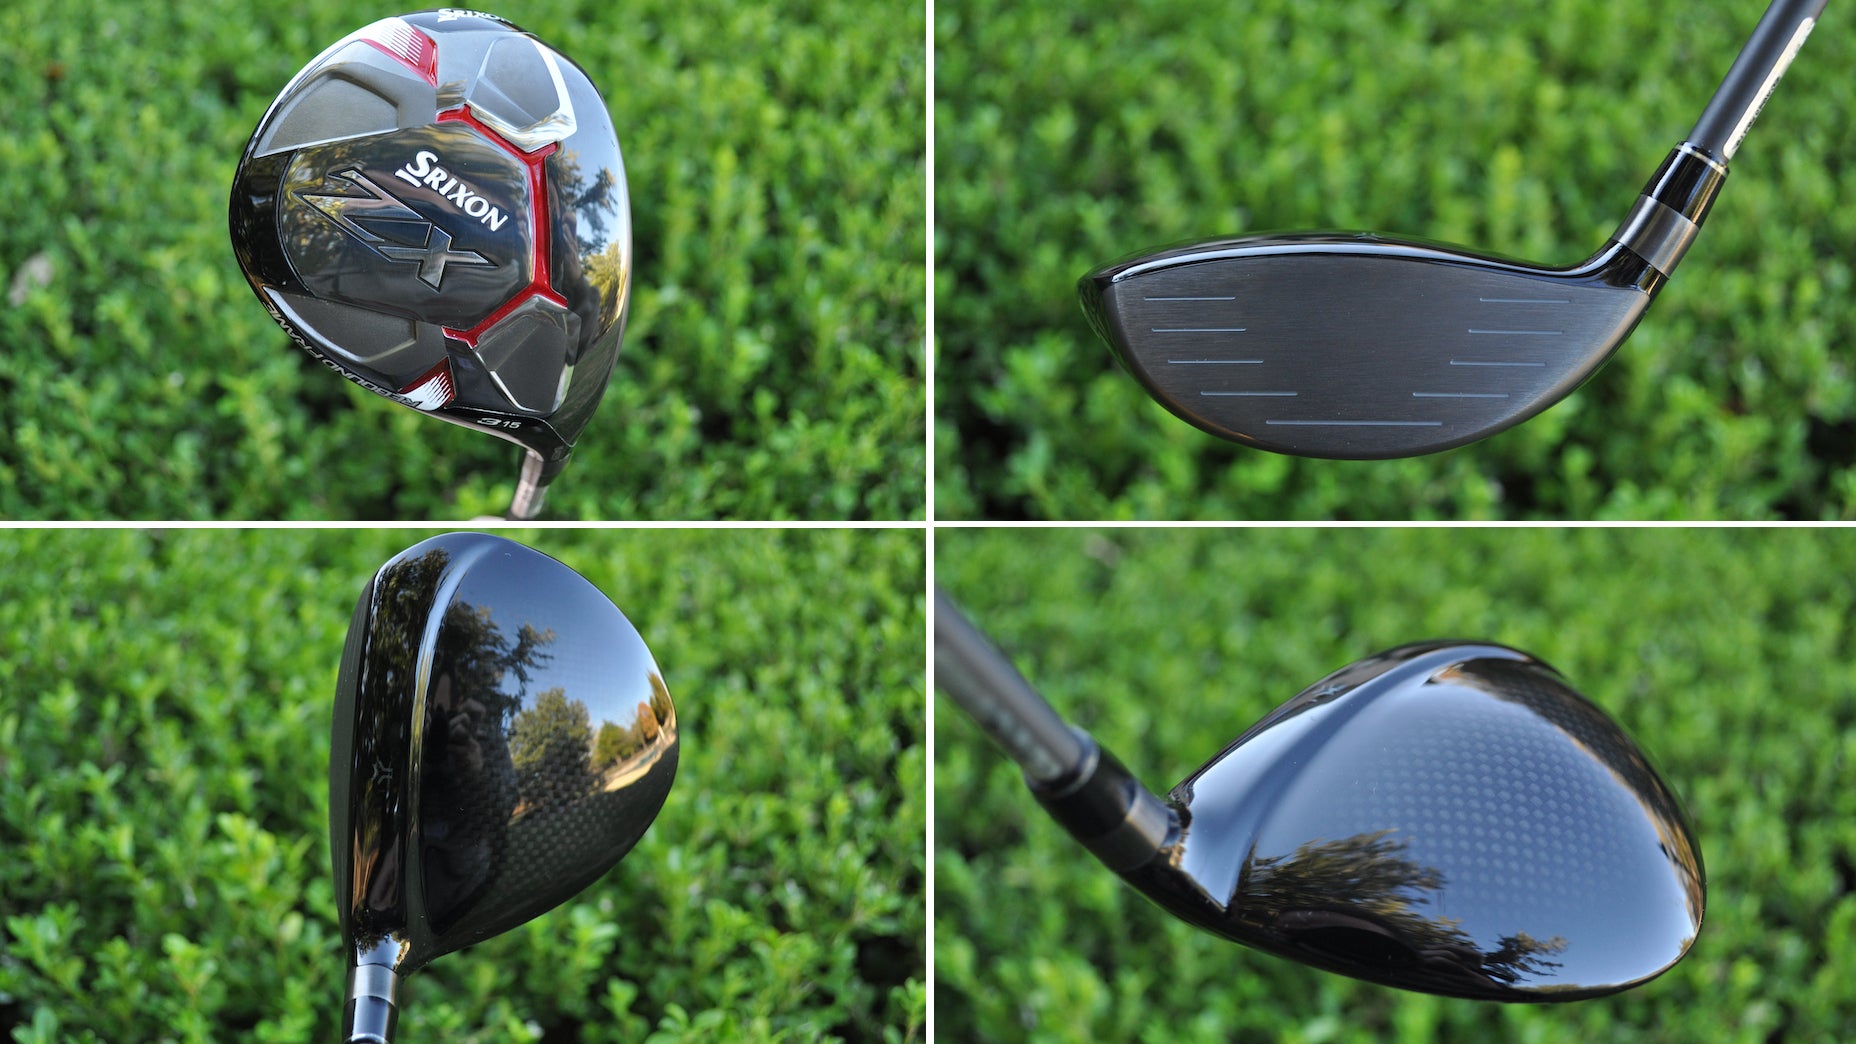 Srixon Zx5 Driver Review The Last Witch Hunter